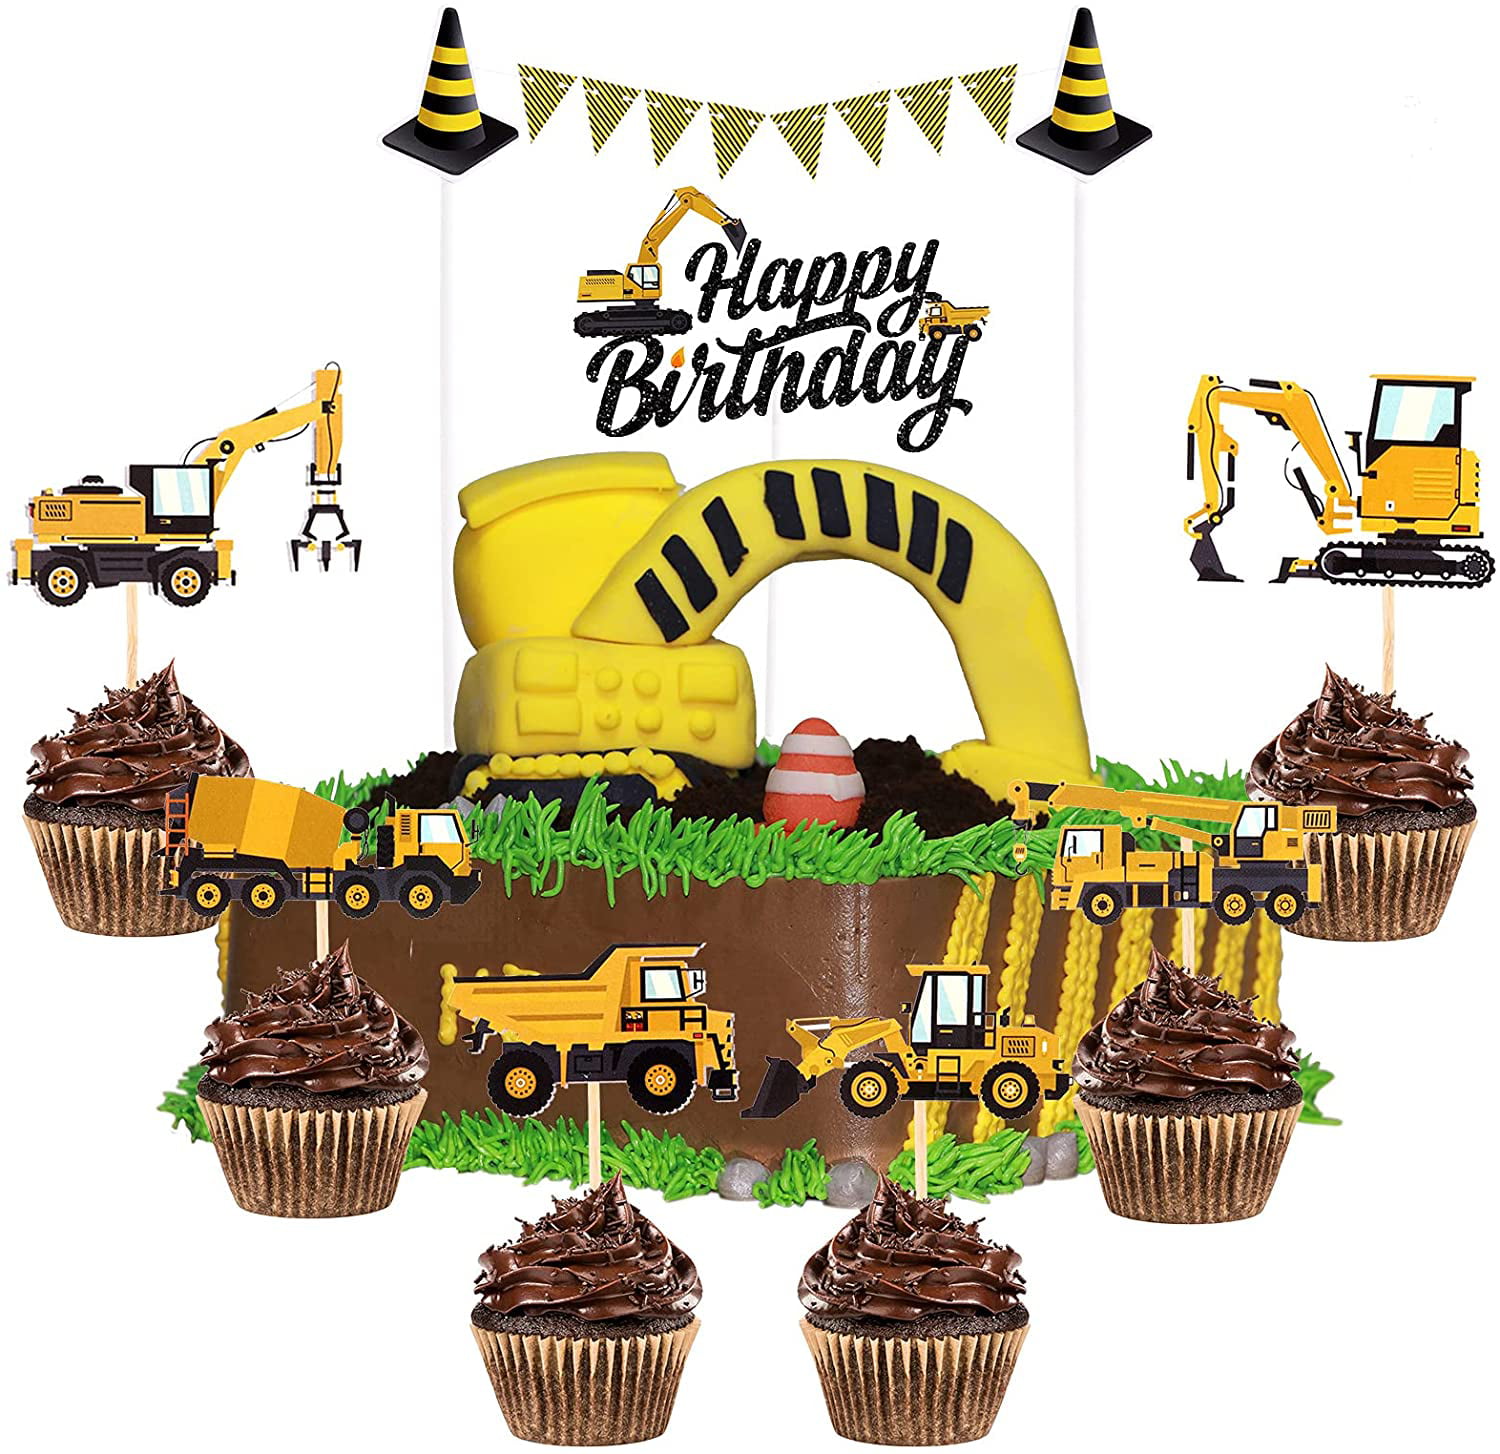 Dump Truck Excavator Tractor Party Cake Toppers for Kids Birthday Baby Shower Party Decorations Supplies. 35-pack Construction Cupcake Toppers Picks 